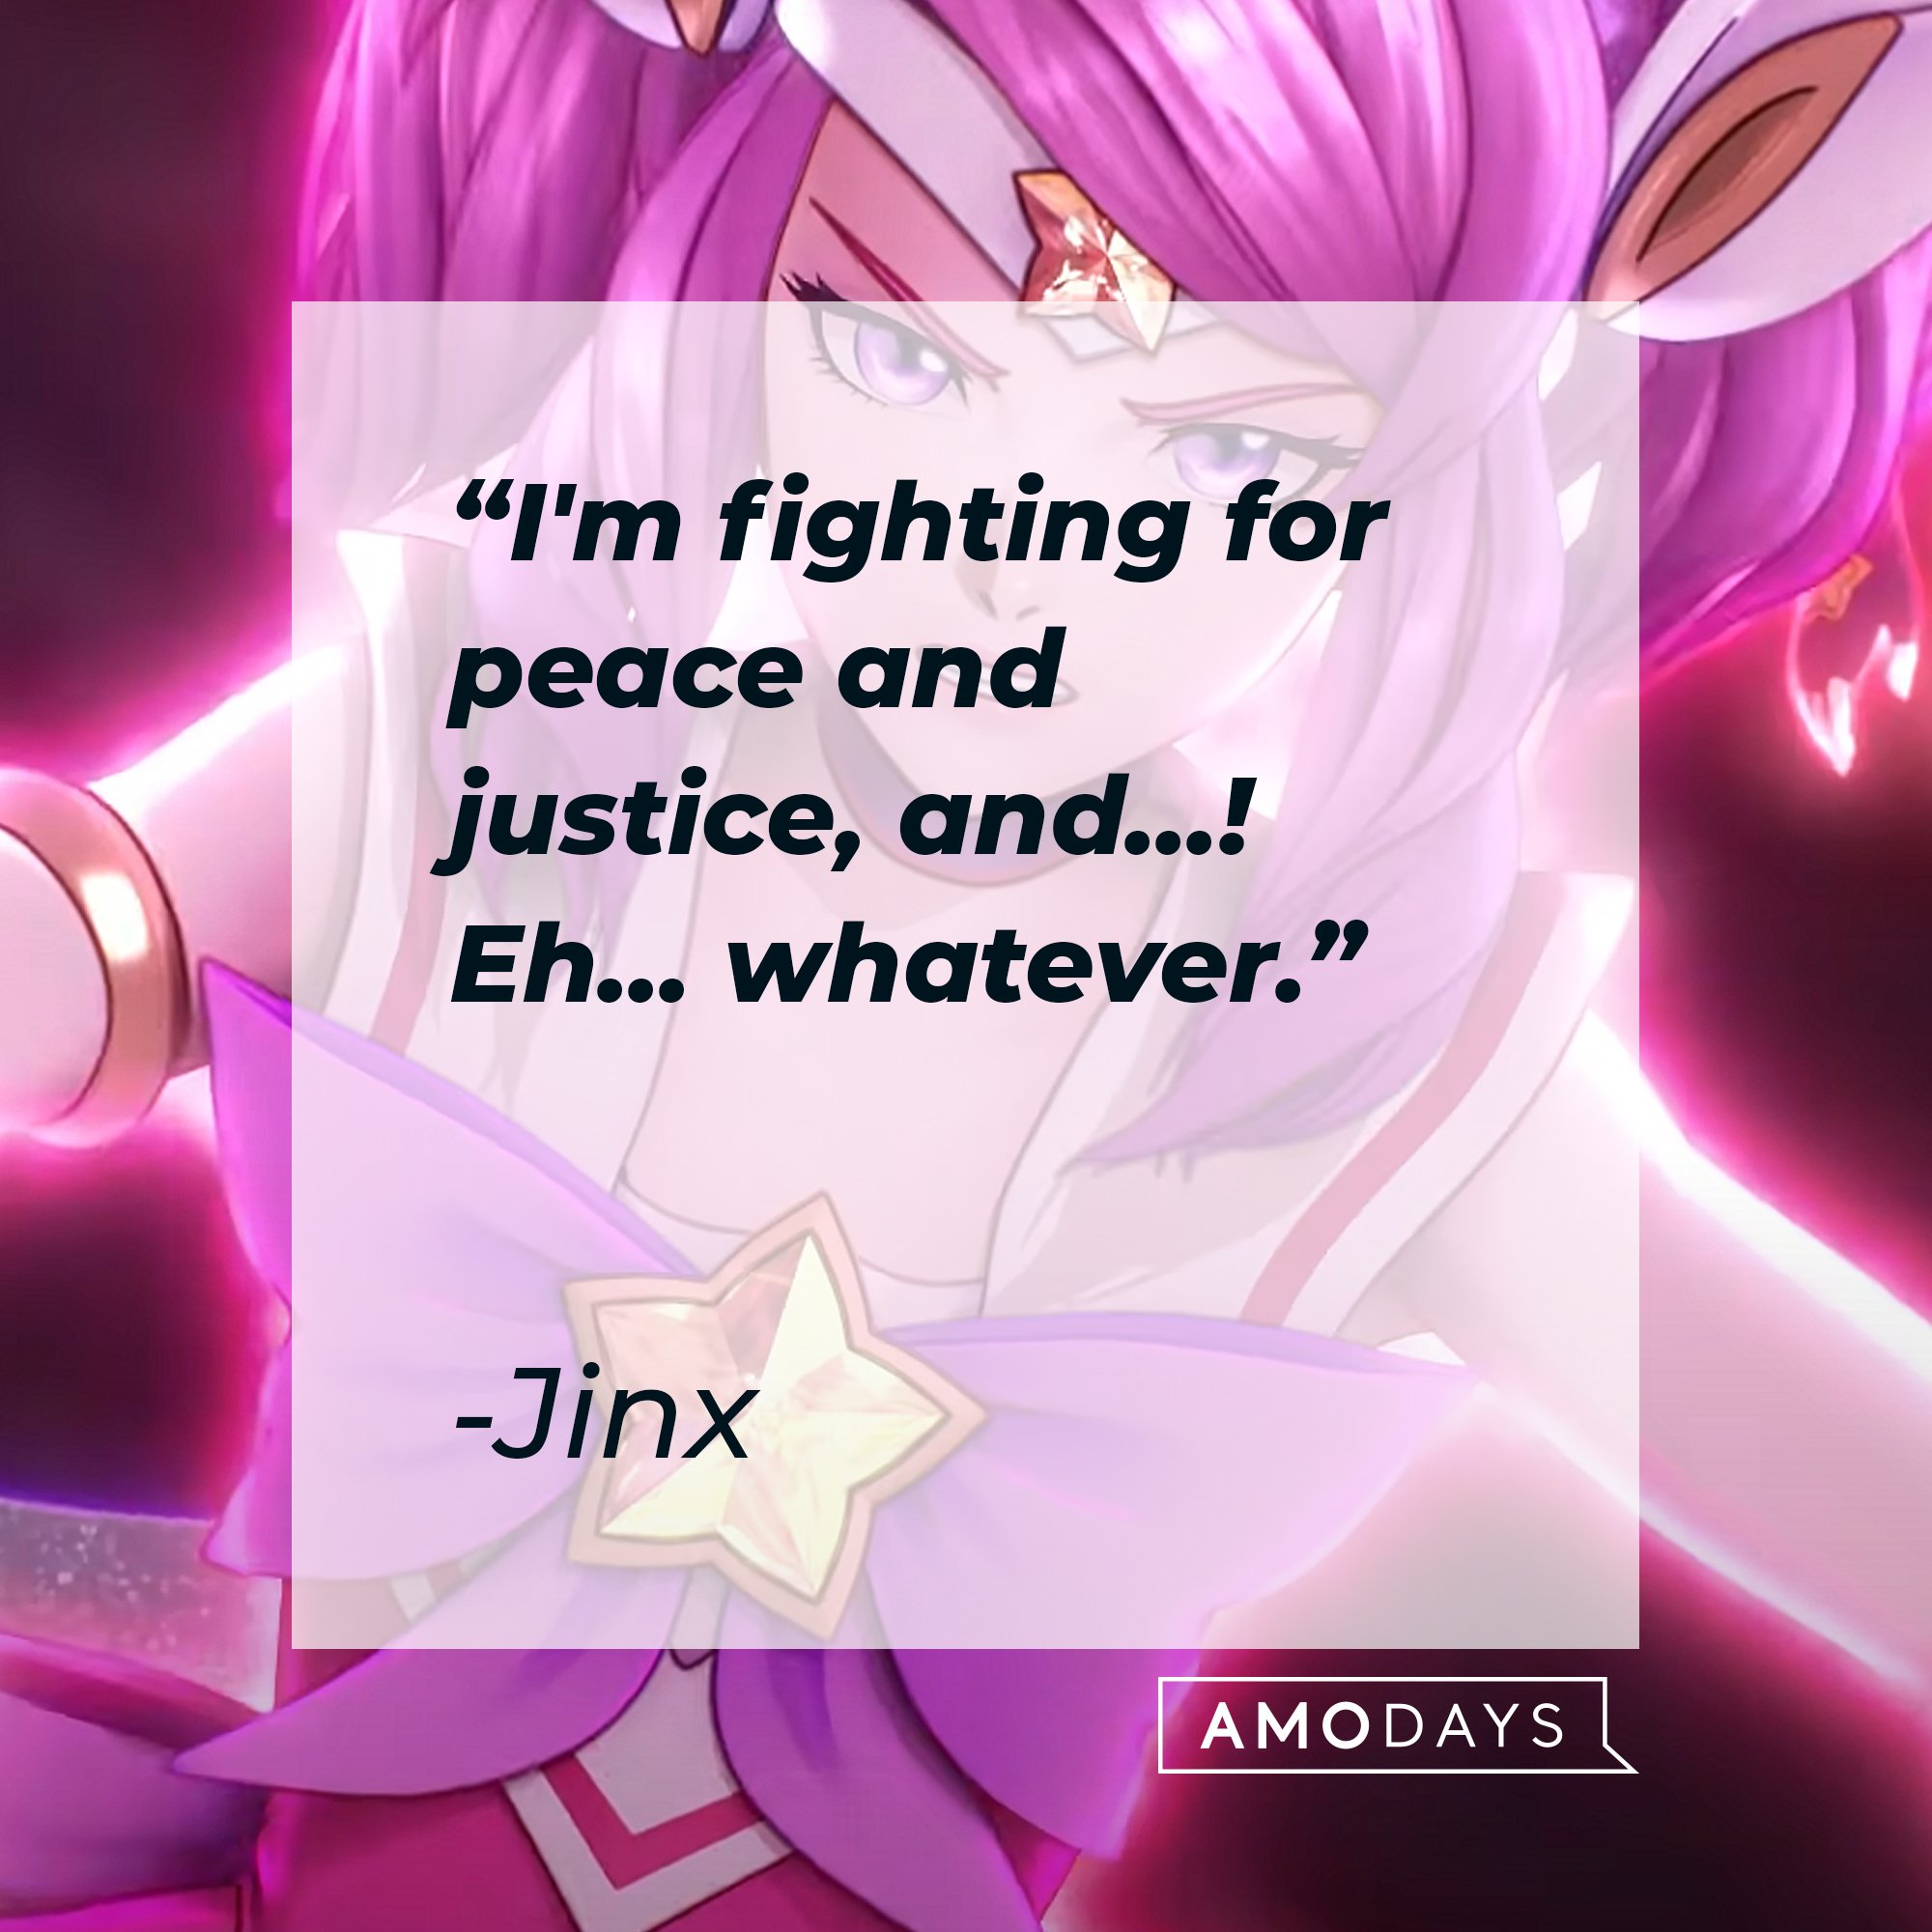 Jinx's quote: "I'm fighting for peace and justice, and...! Eh... whatever." | Image: AmoDays